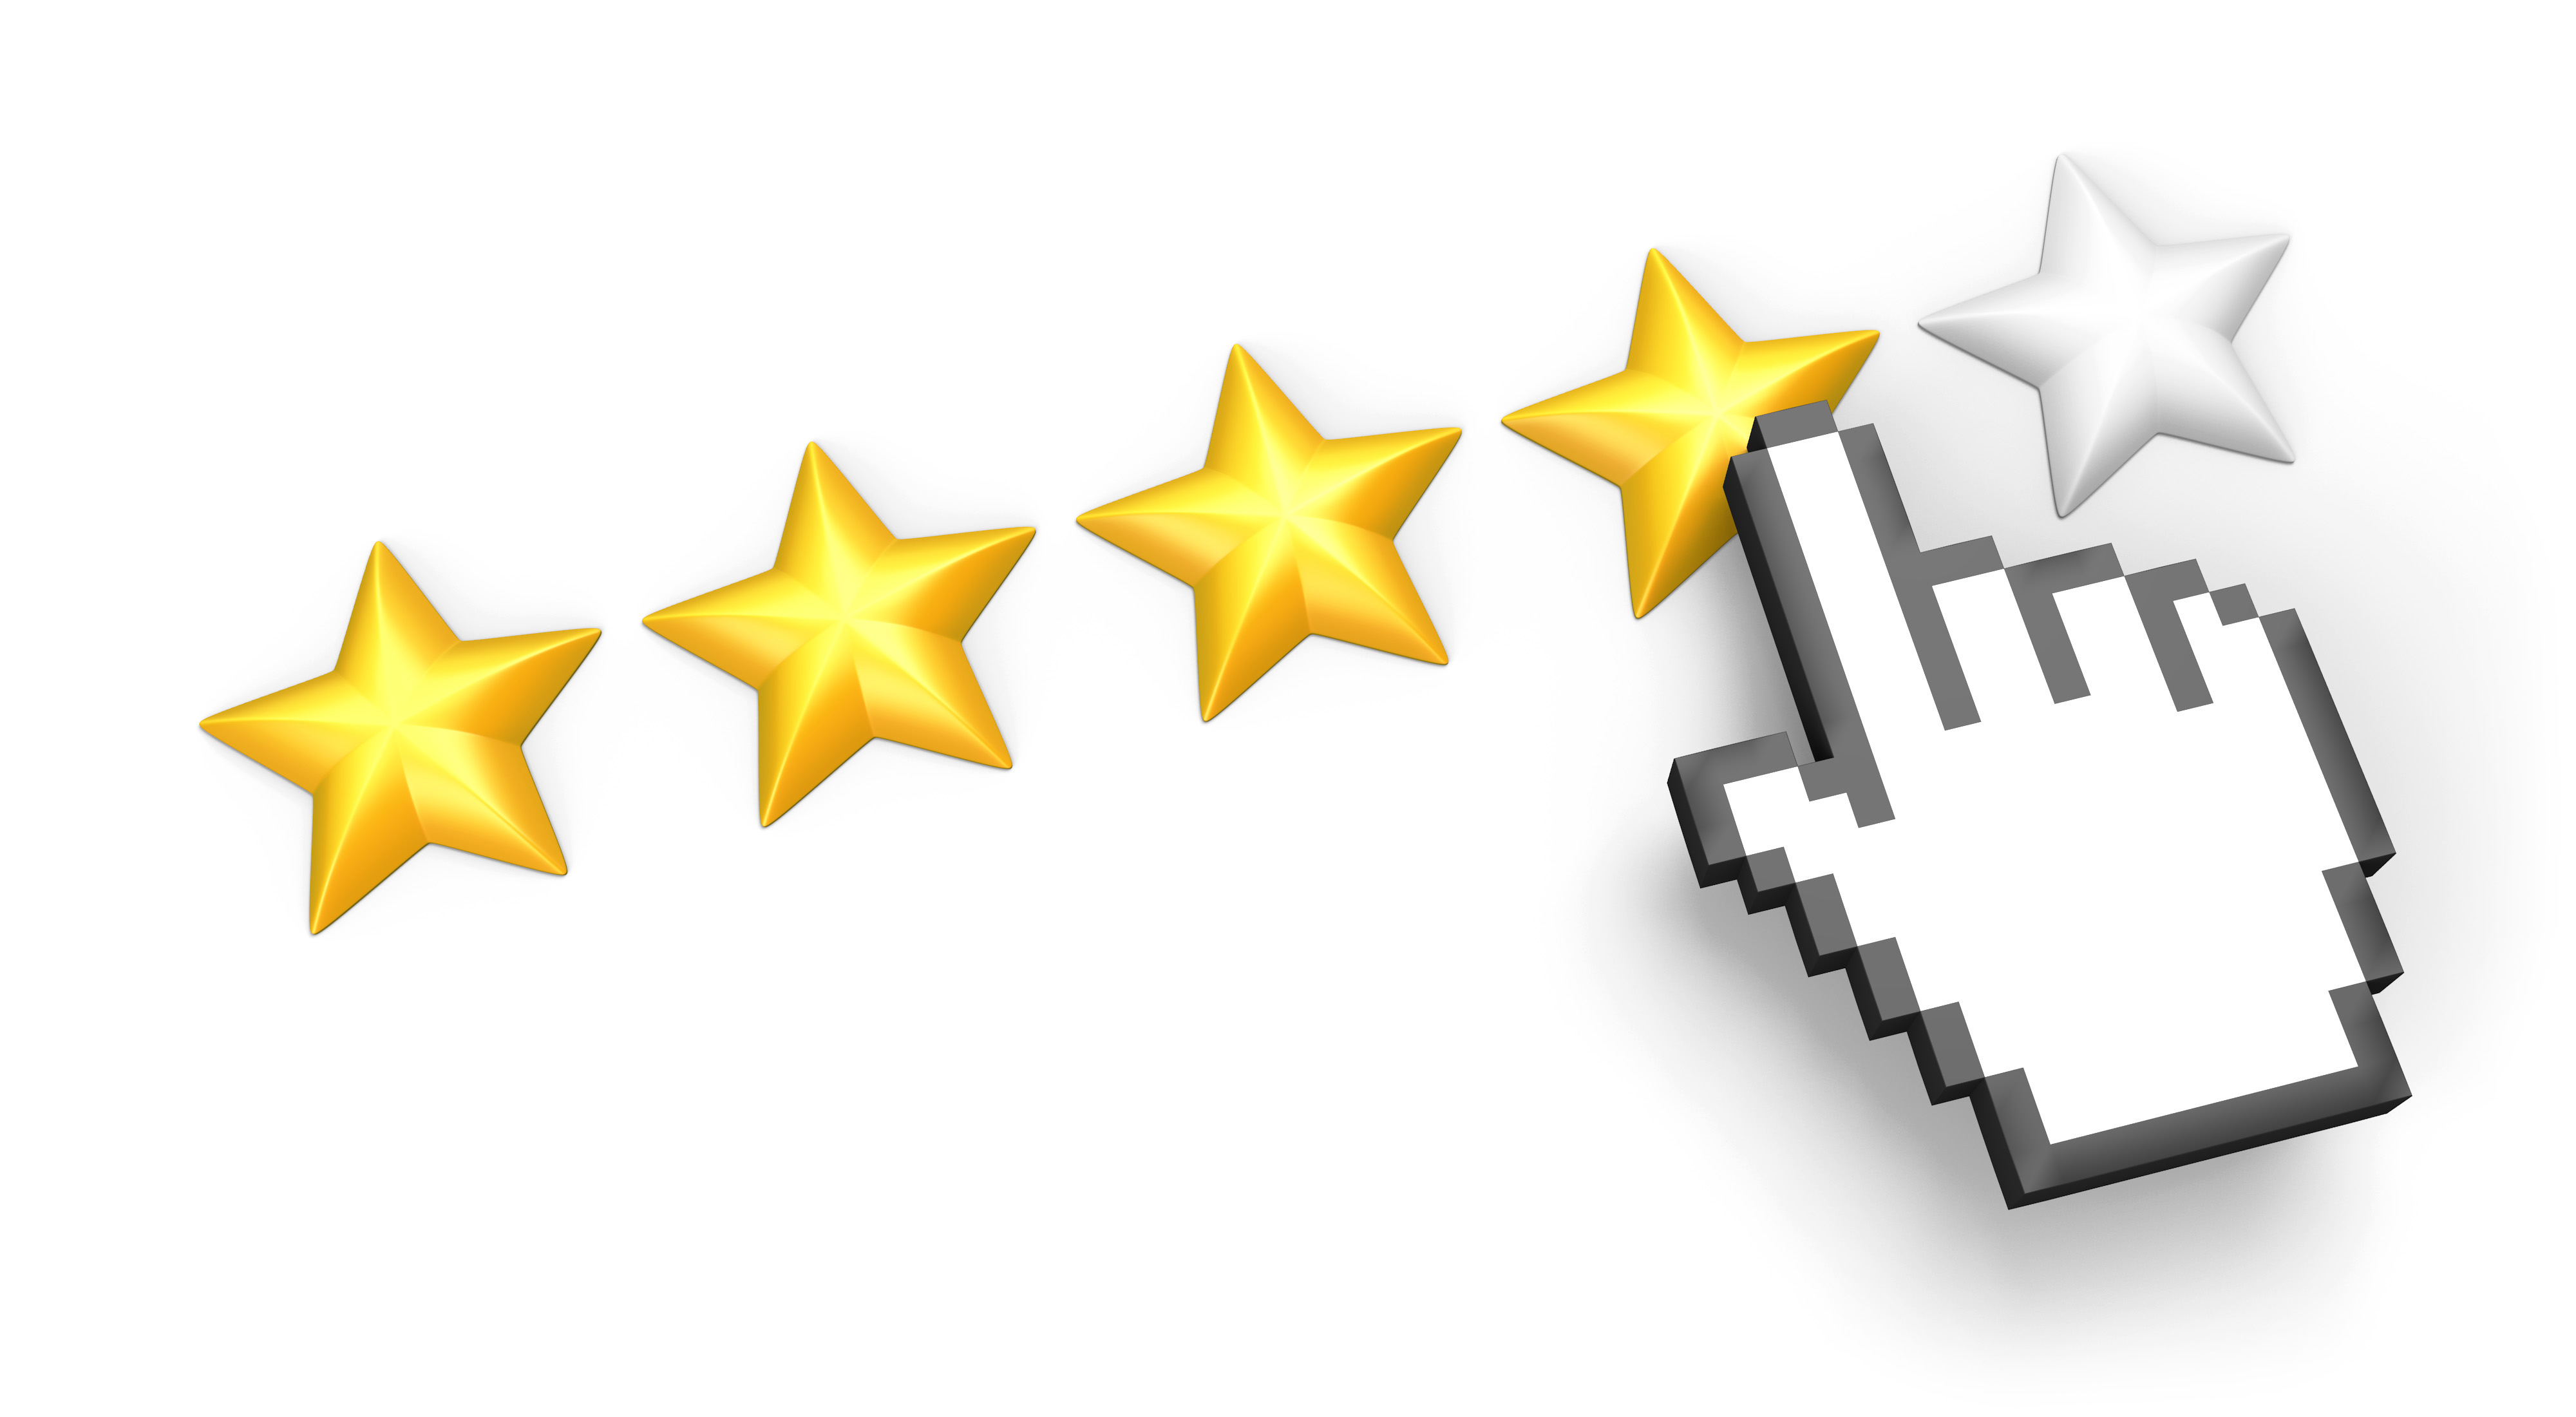 Red Star Reviews